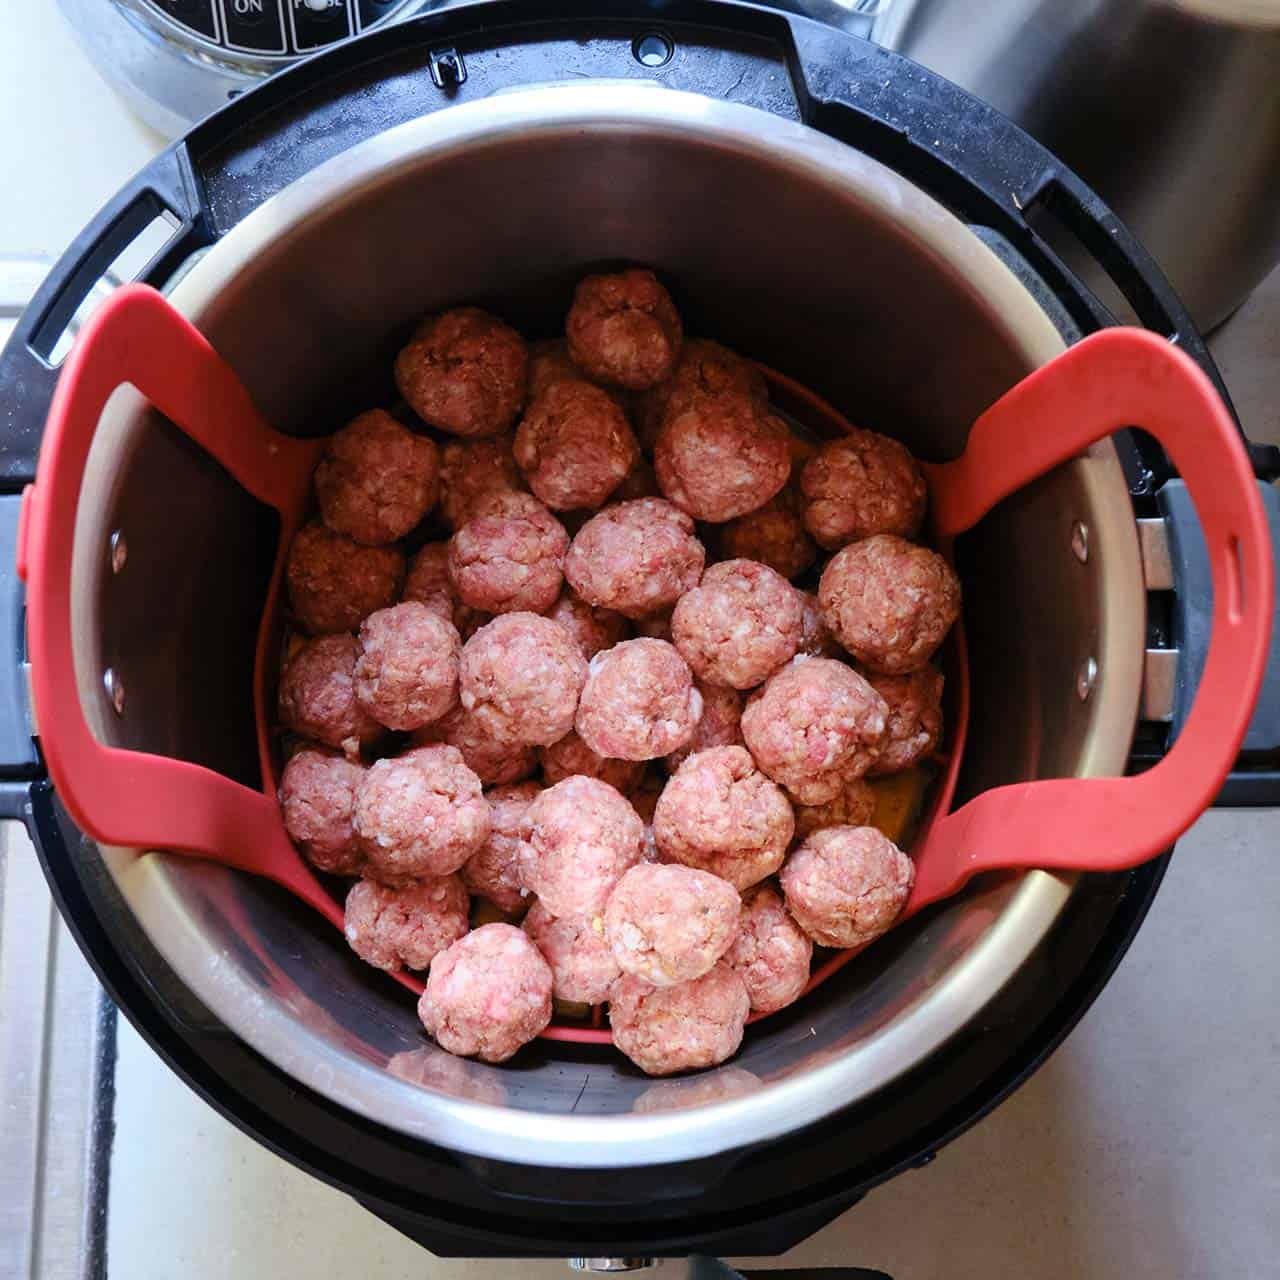 An Instant Pot with a red baking sling covered with uncooked meatballs